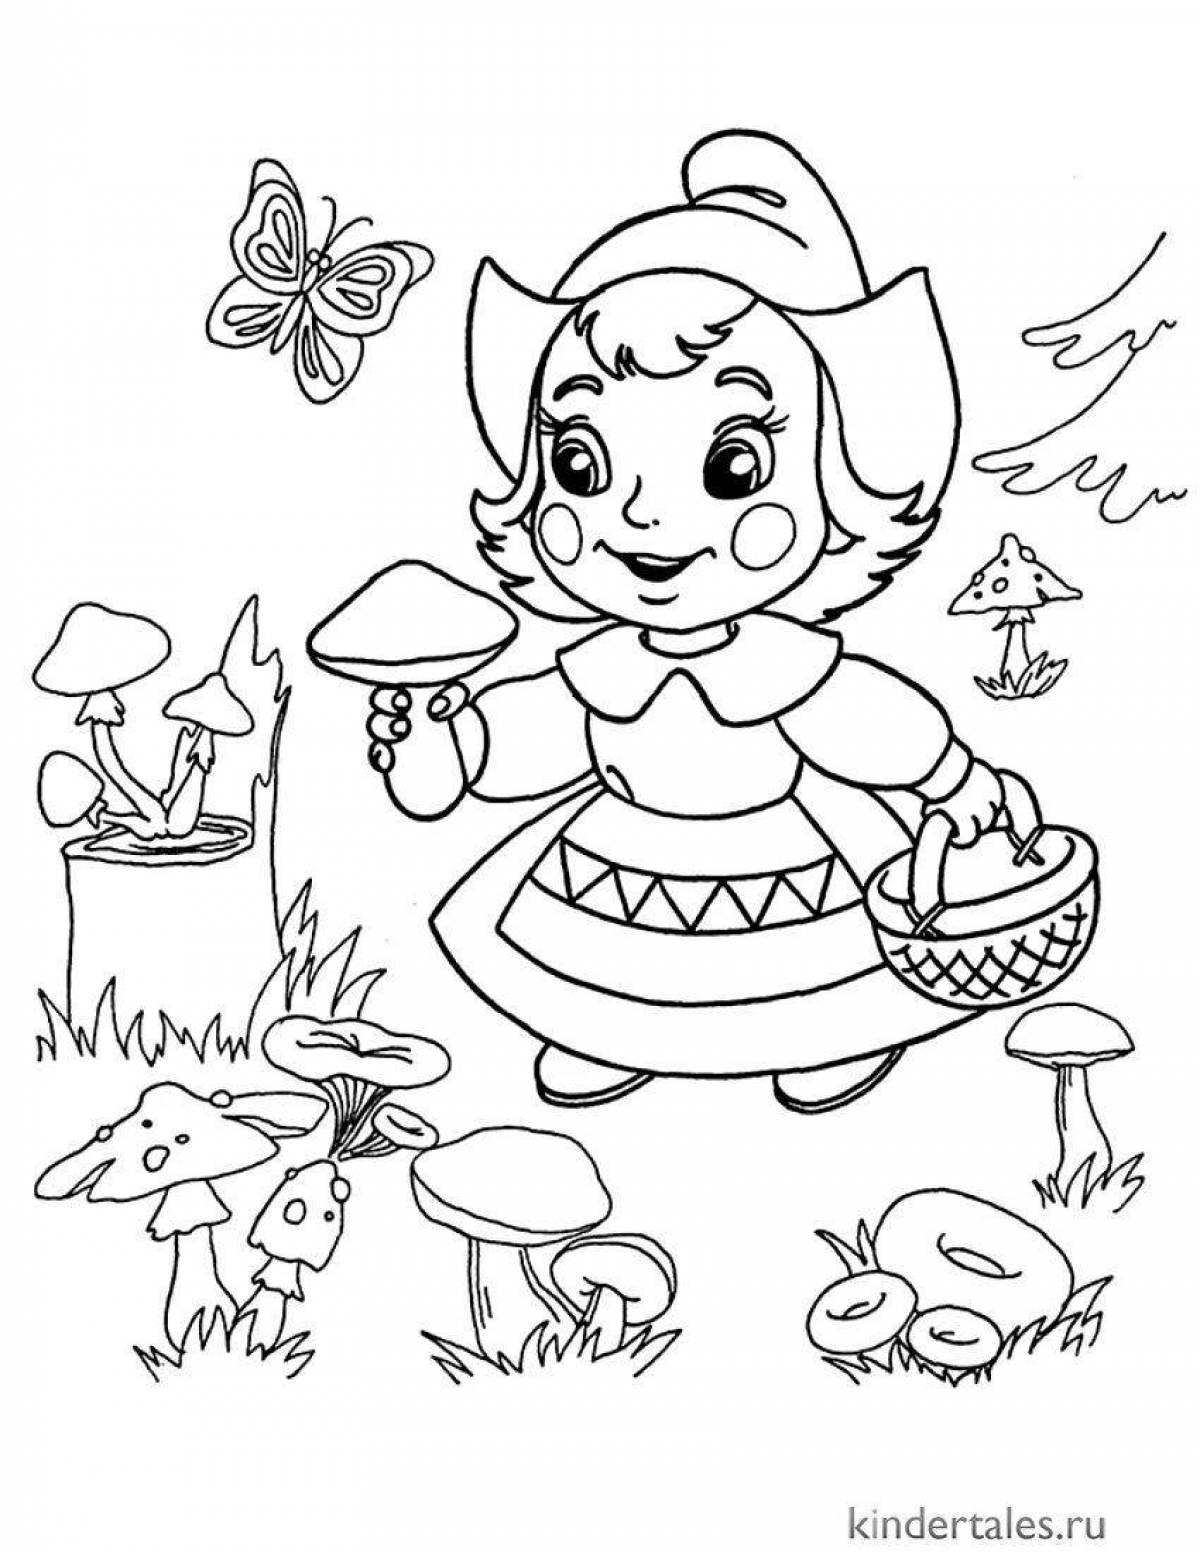 Playful fairy tale coloring book